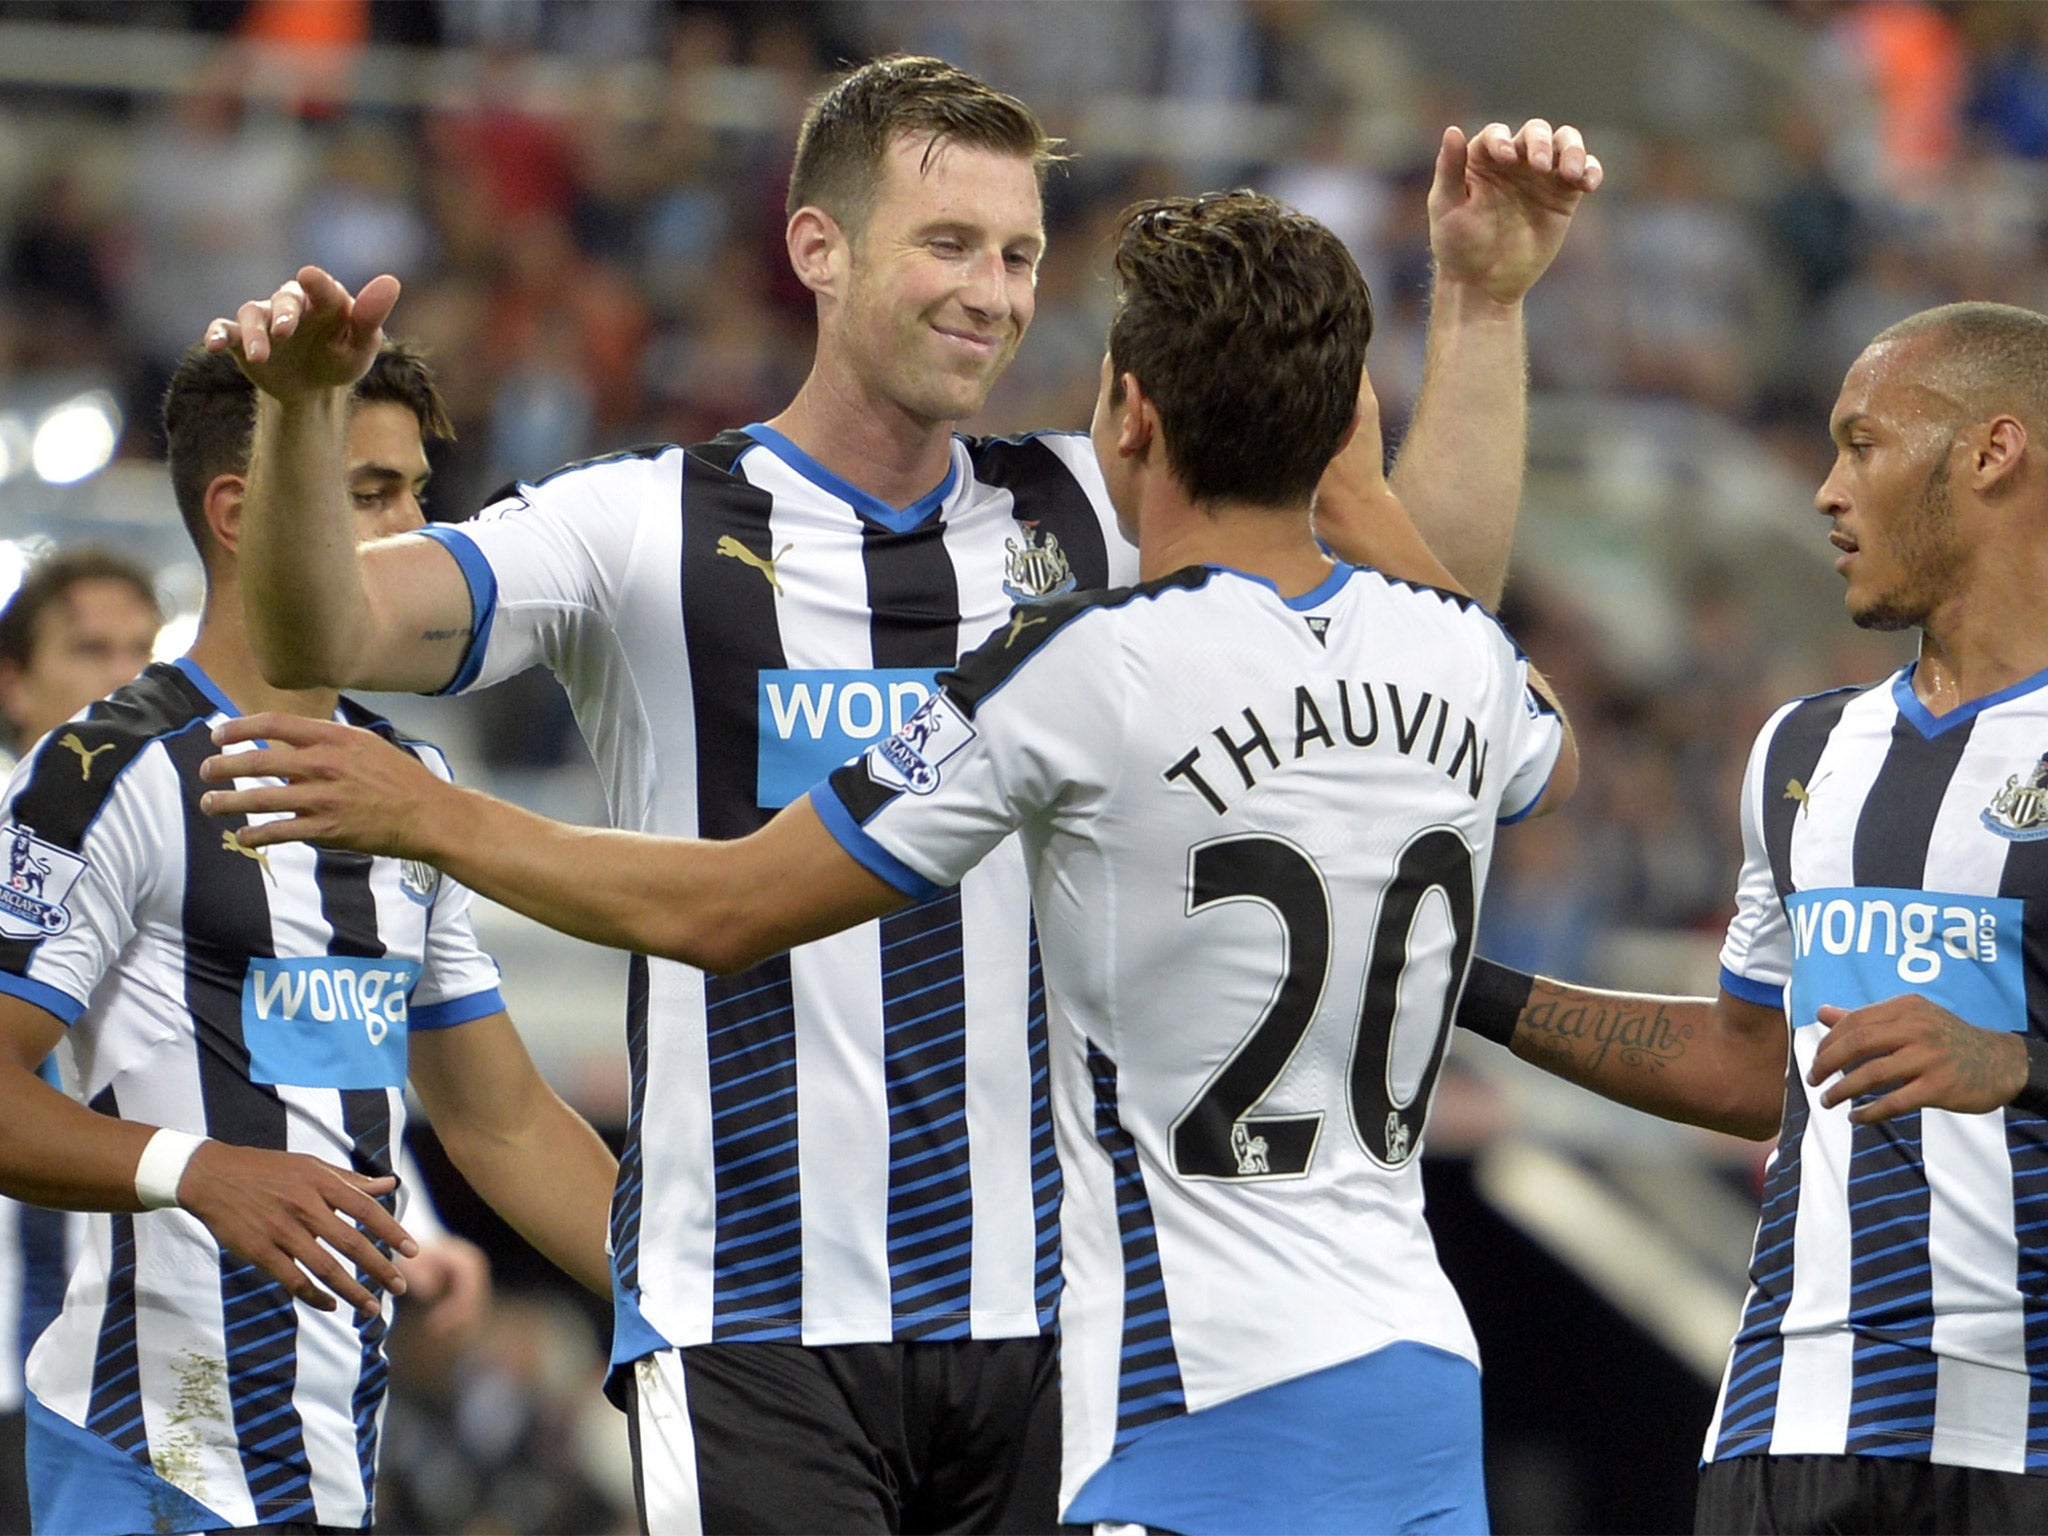 Mike Williamson and Florian Thauvin celebrate after Newcastle’s fourth goal